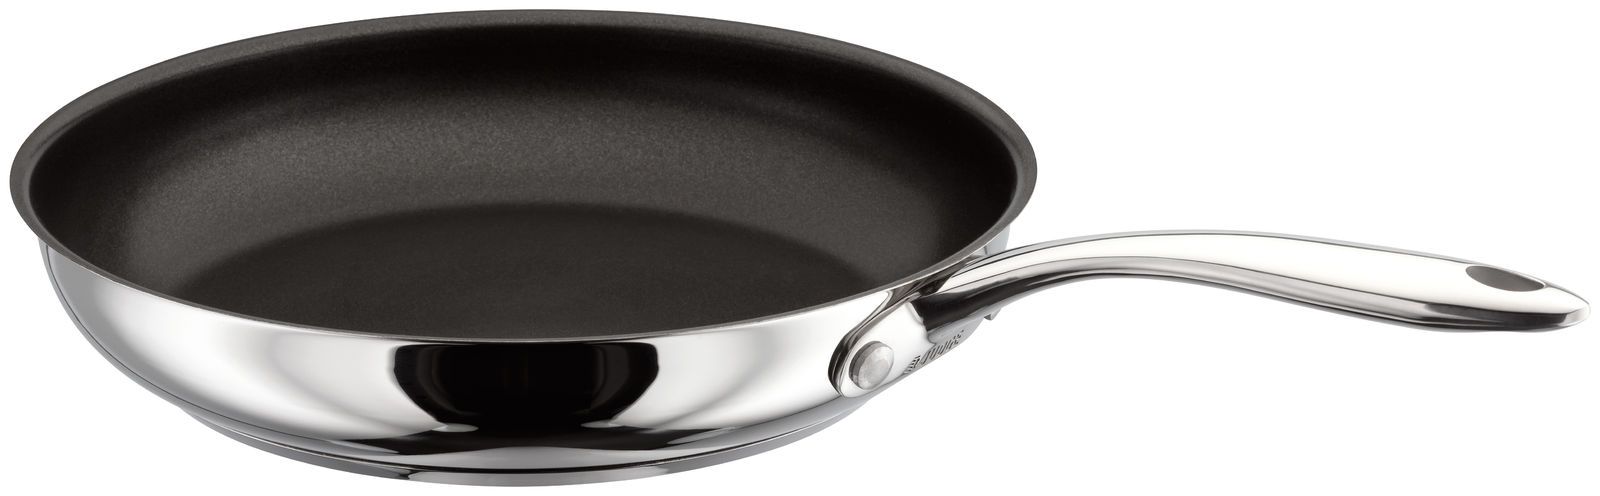 Judge-Stainless-Steel-Non-Stick-20cm-Frying-Pan